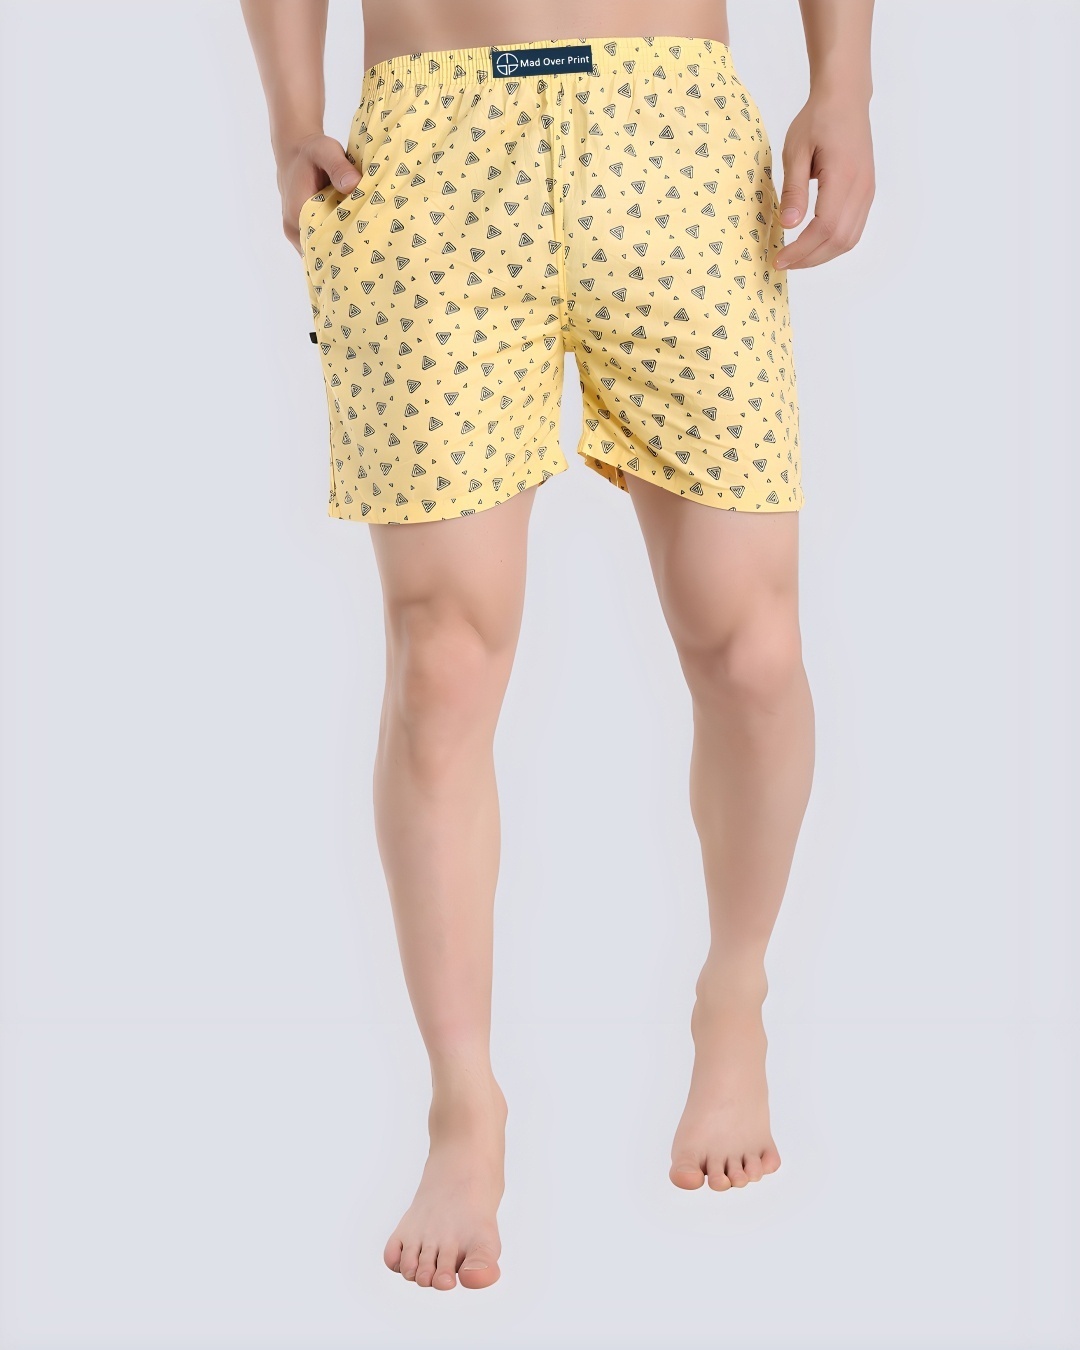 Shop Men's All Over Printed Cotton Boxers (Pack of 3)-Full